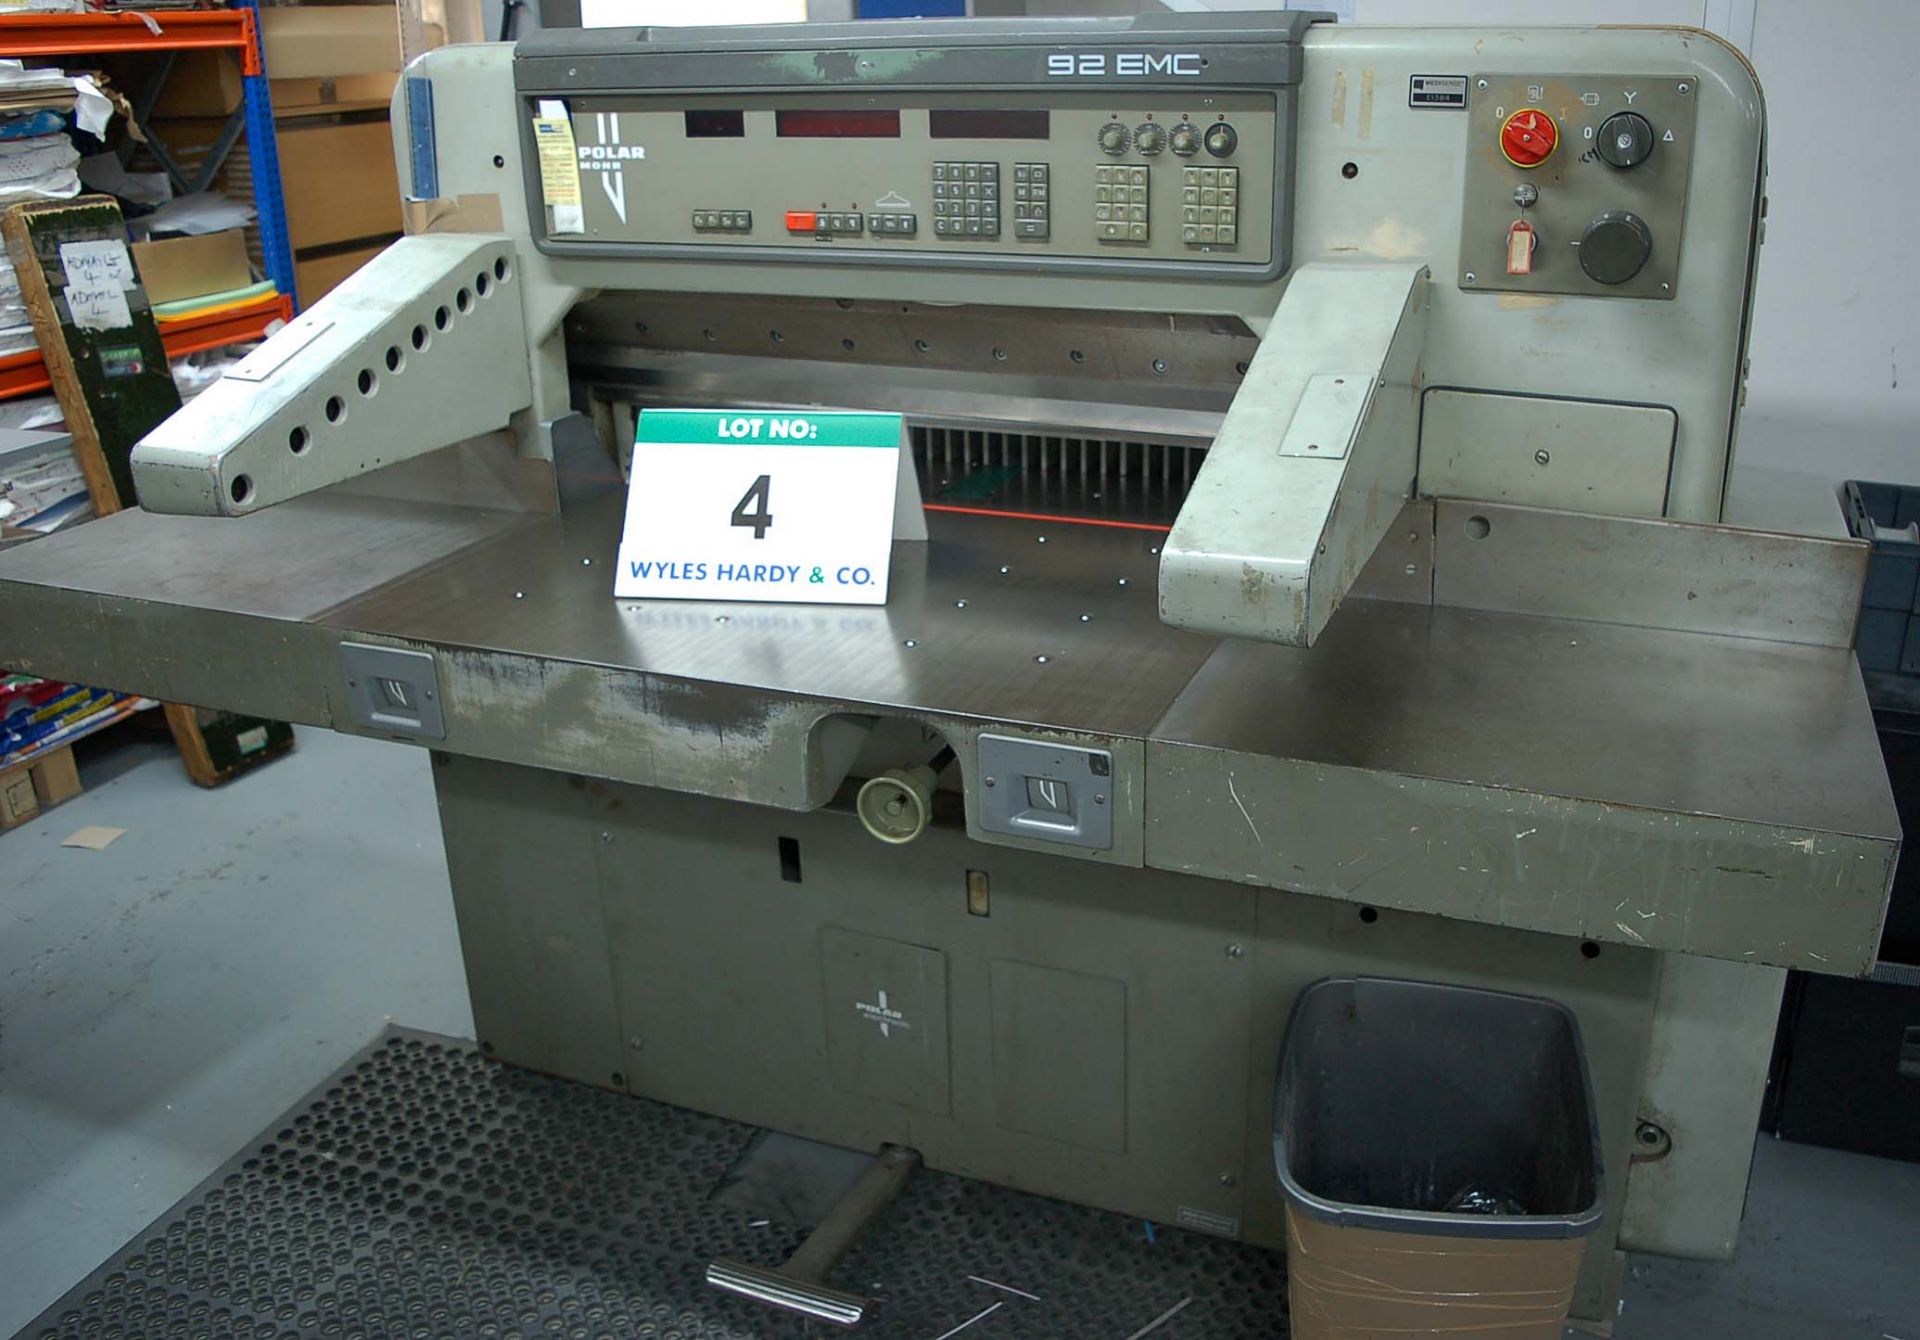 A POLAR MOHR Model 92 EMC 92cm Mechanical Paper Guillotine, Serial No. 6011113 with fitted Auto Back